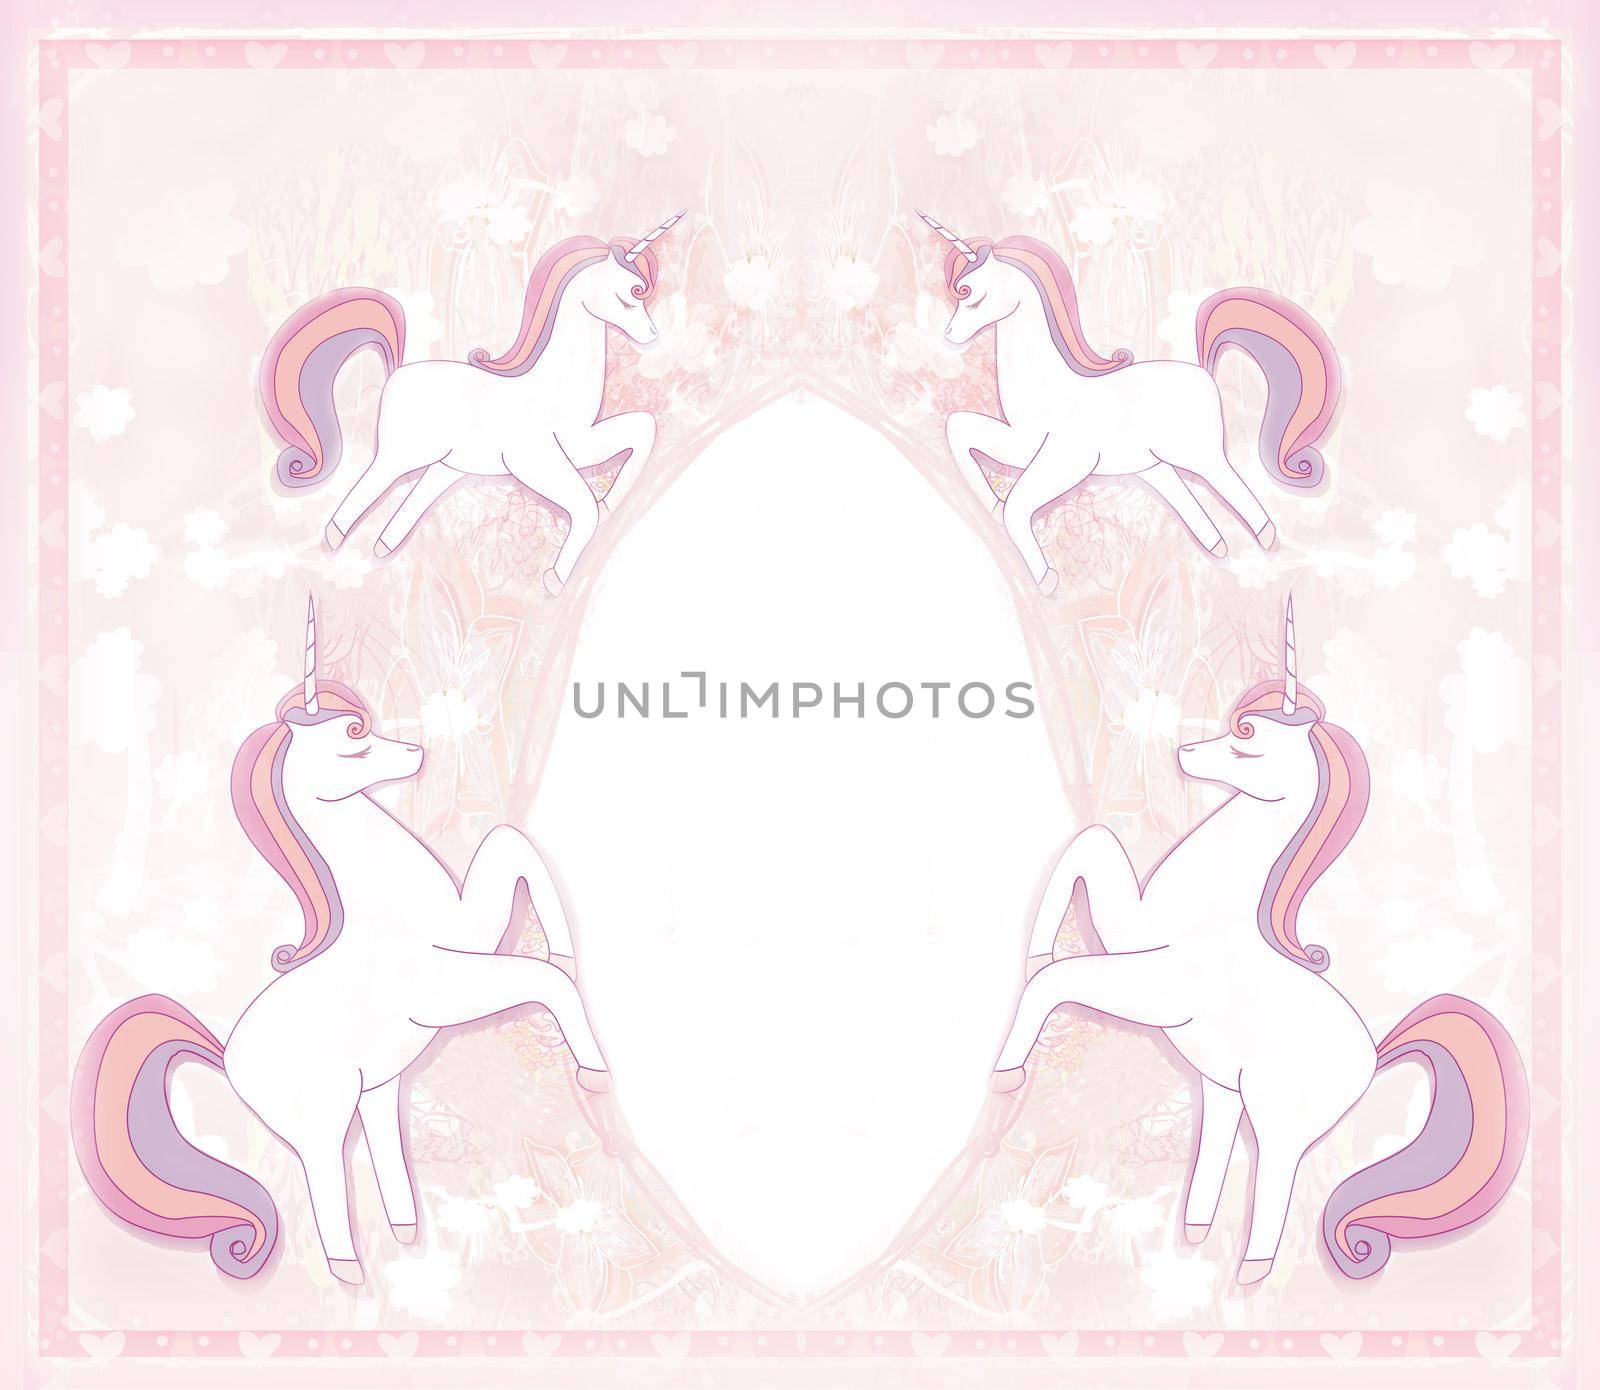 decorative frame with cute unicorns on a beautiful artistic pink floral background